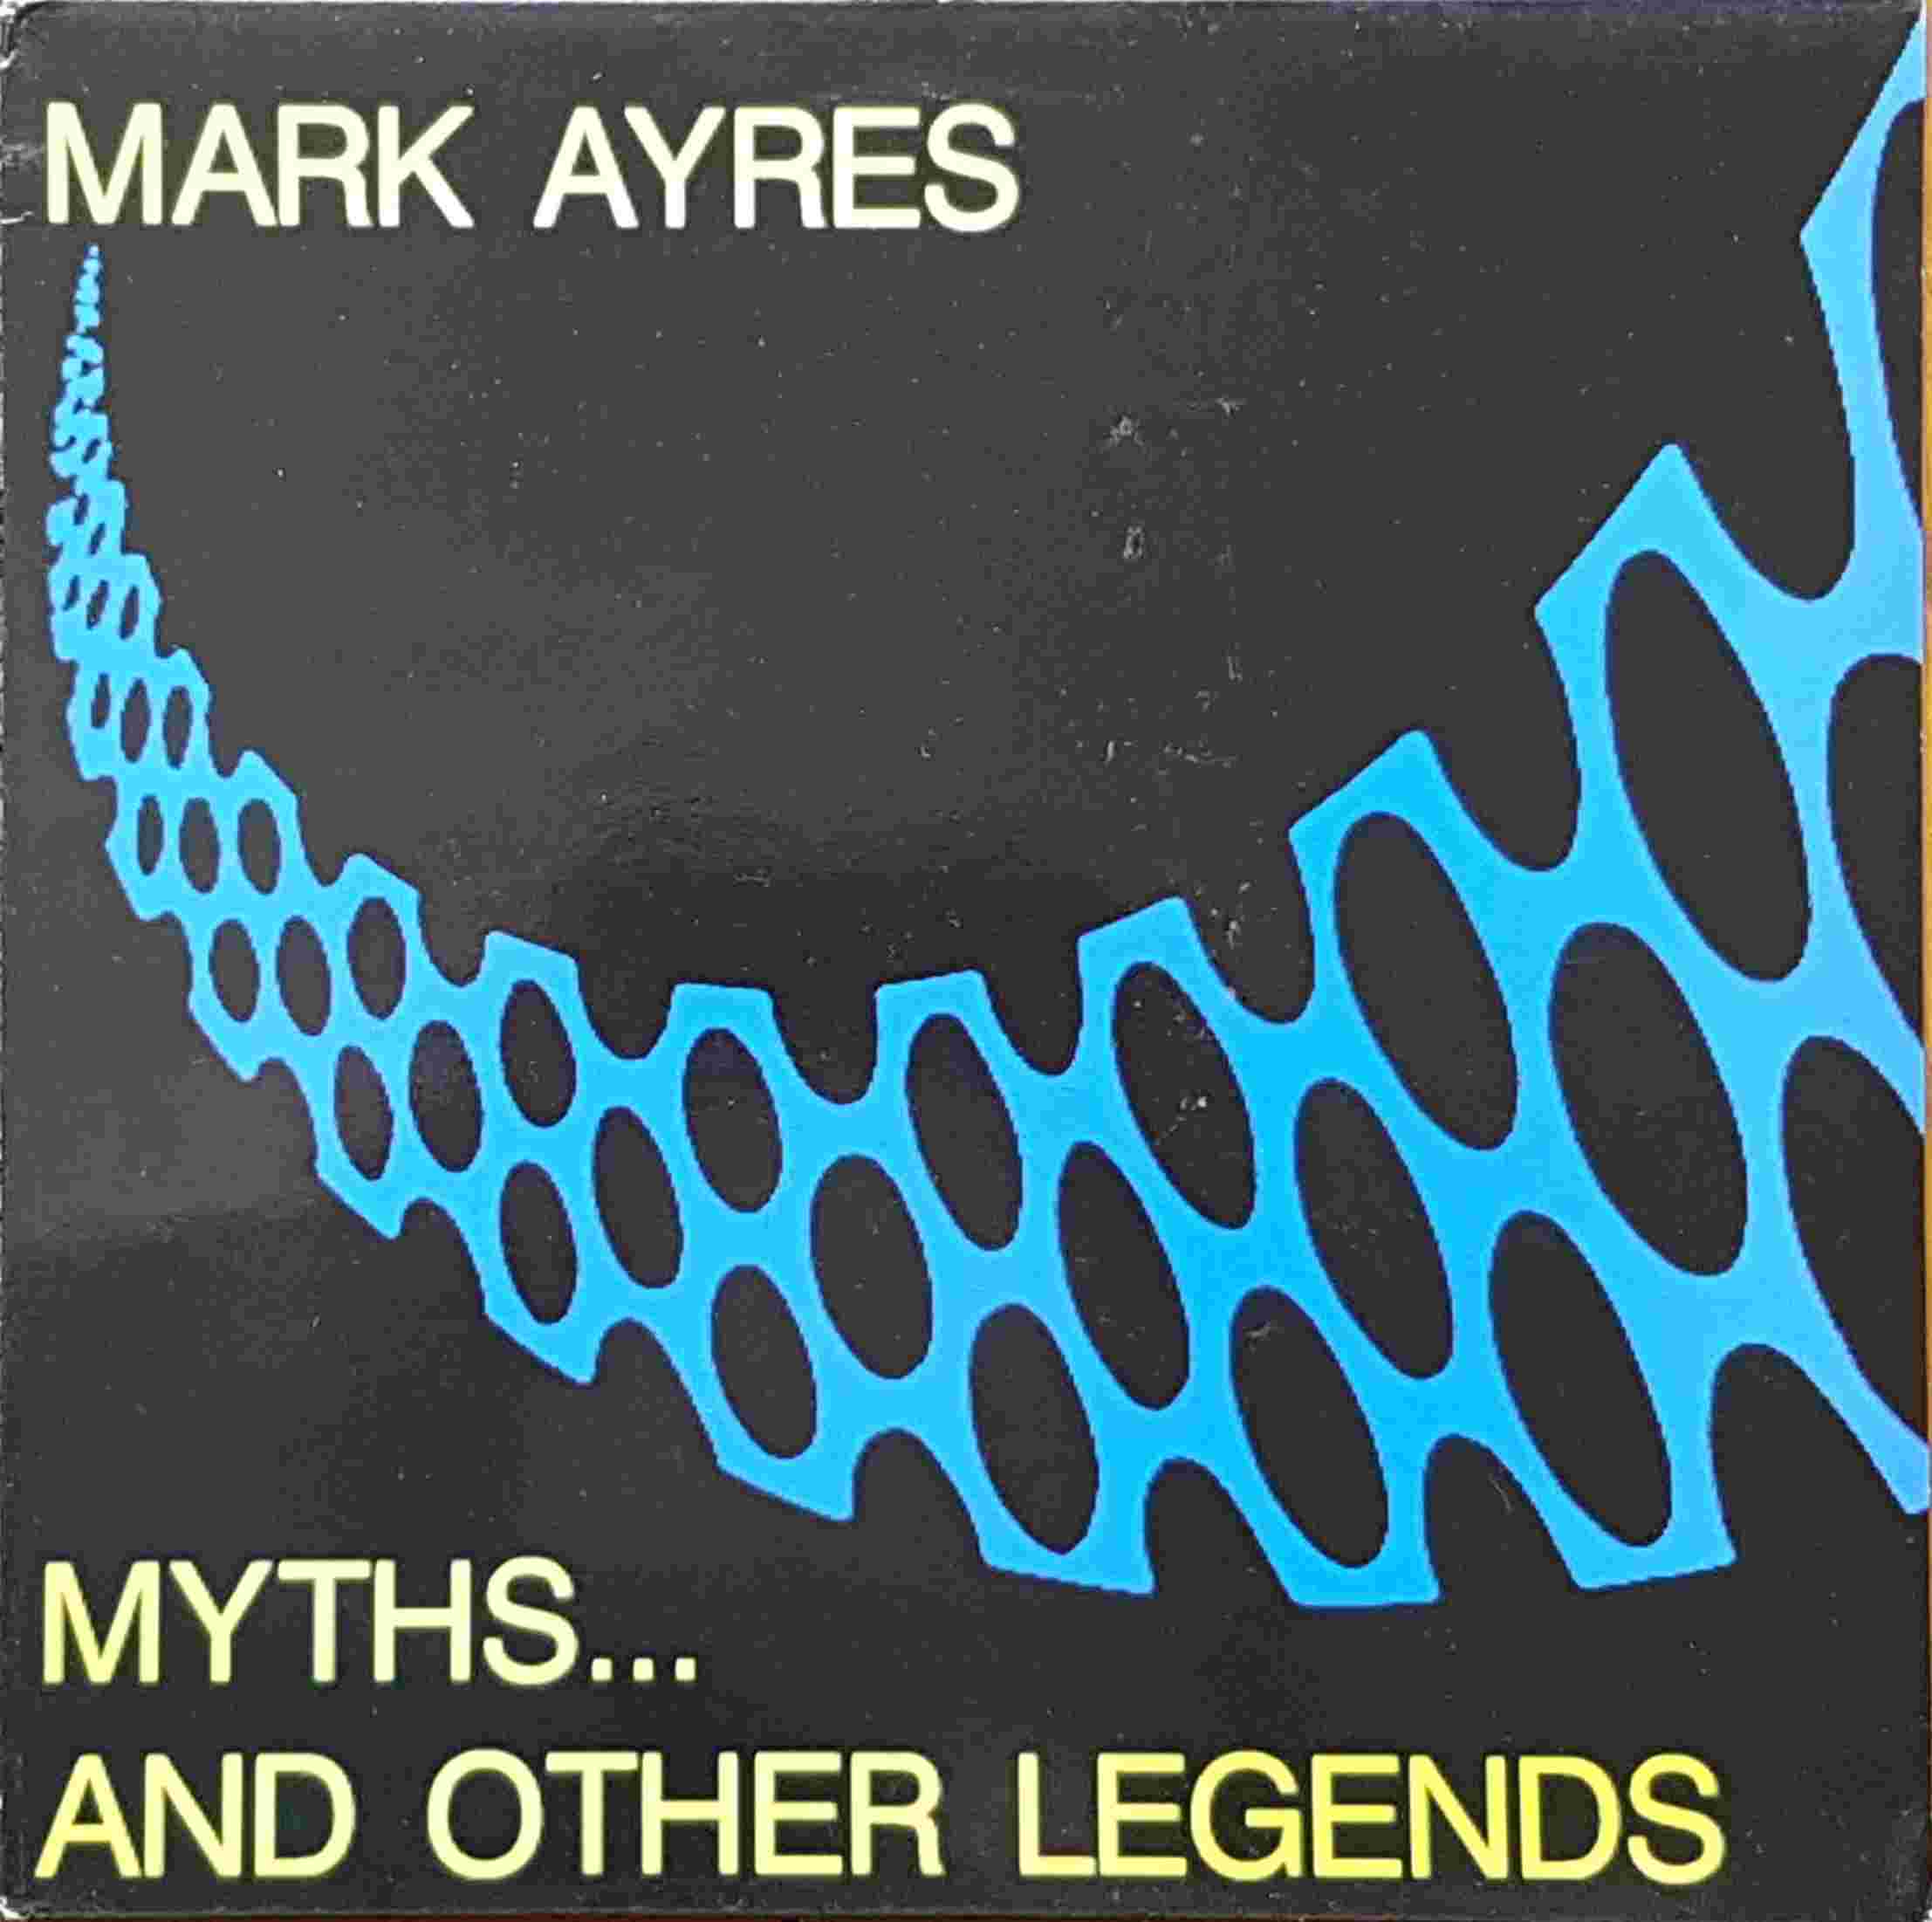 Picture of Myths ... And other legends by artist Mark Ayres from the BBC albums - Records and Tapes library